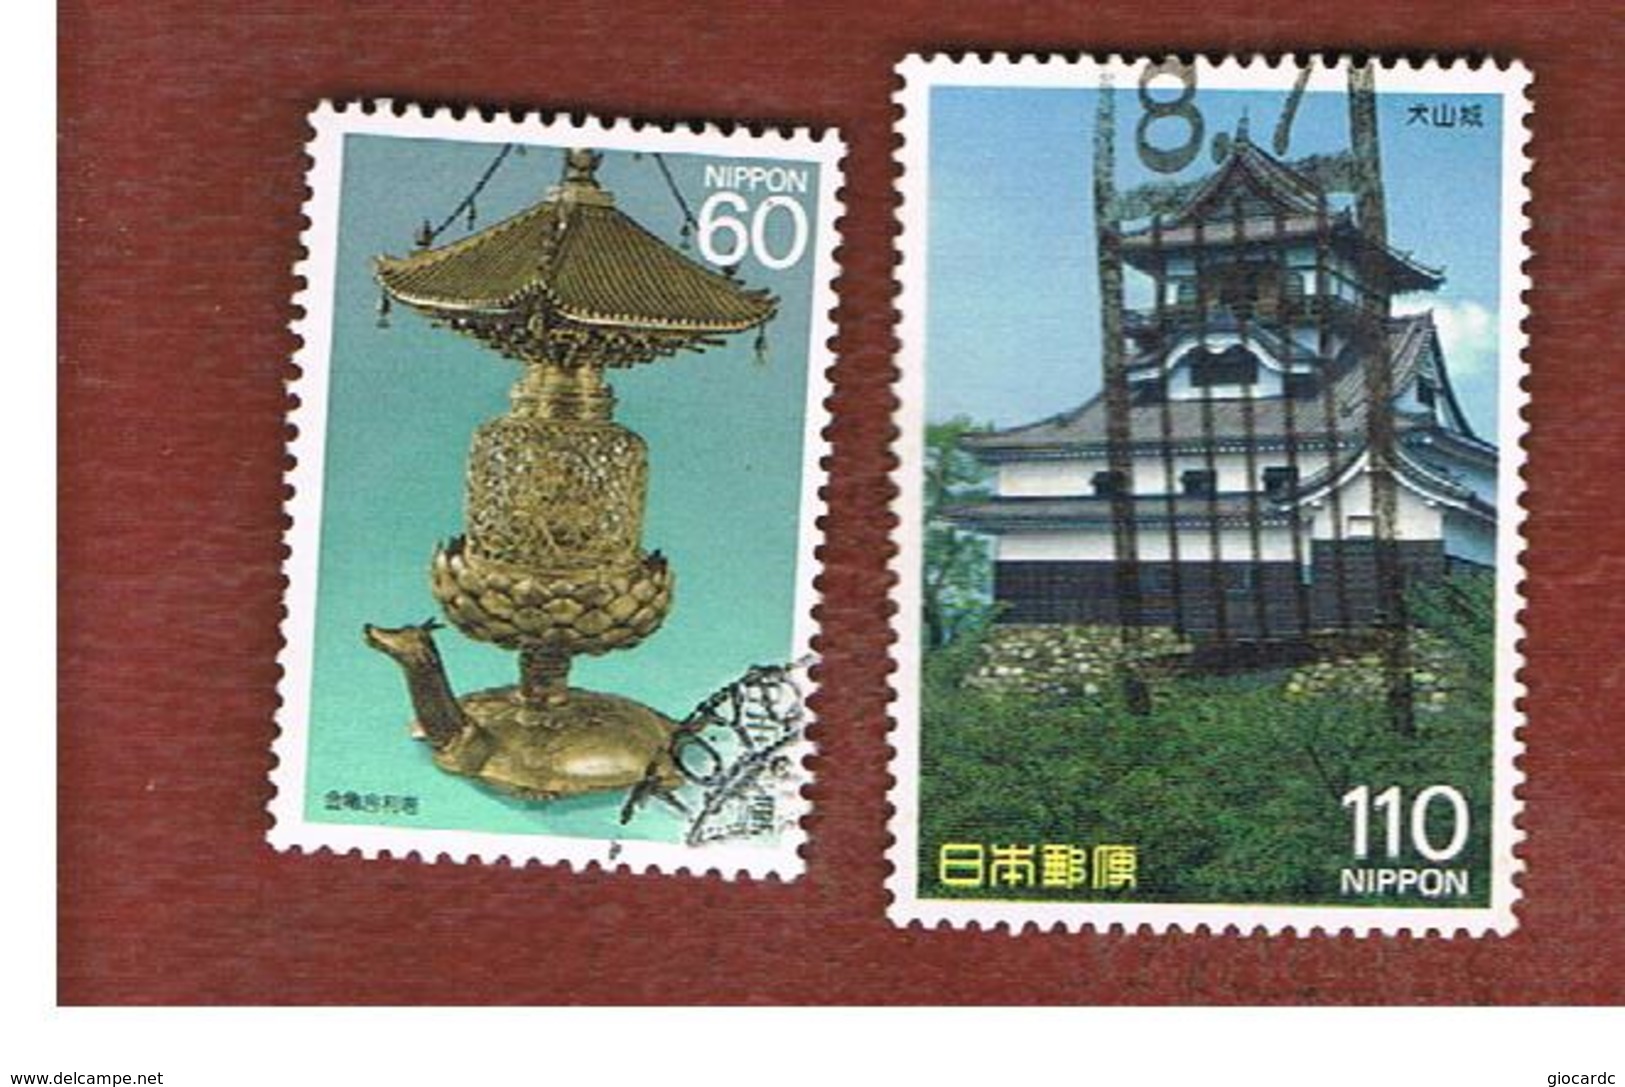 GIAPPONE  (JAPAN) - SG 1900.1901 -   1987 NATIONAL TREASURES: COMPLET SET OF 2    - USED° - Used Stamps